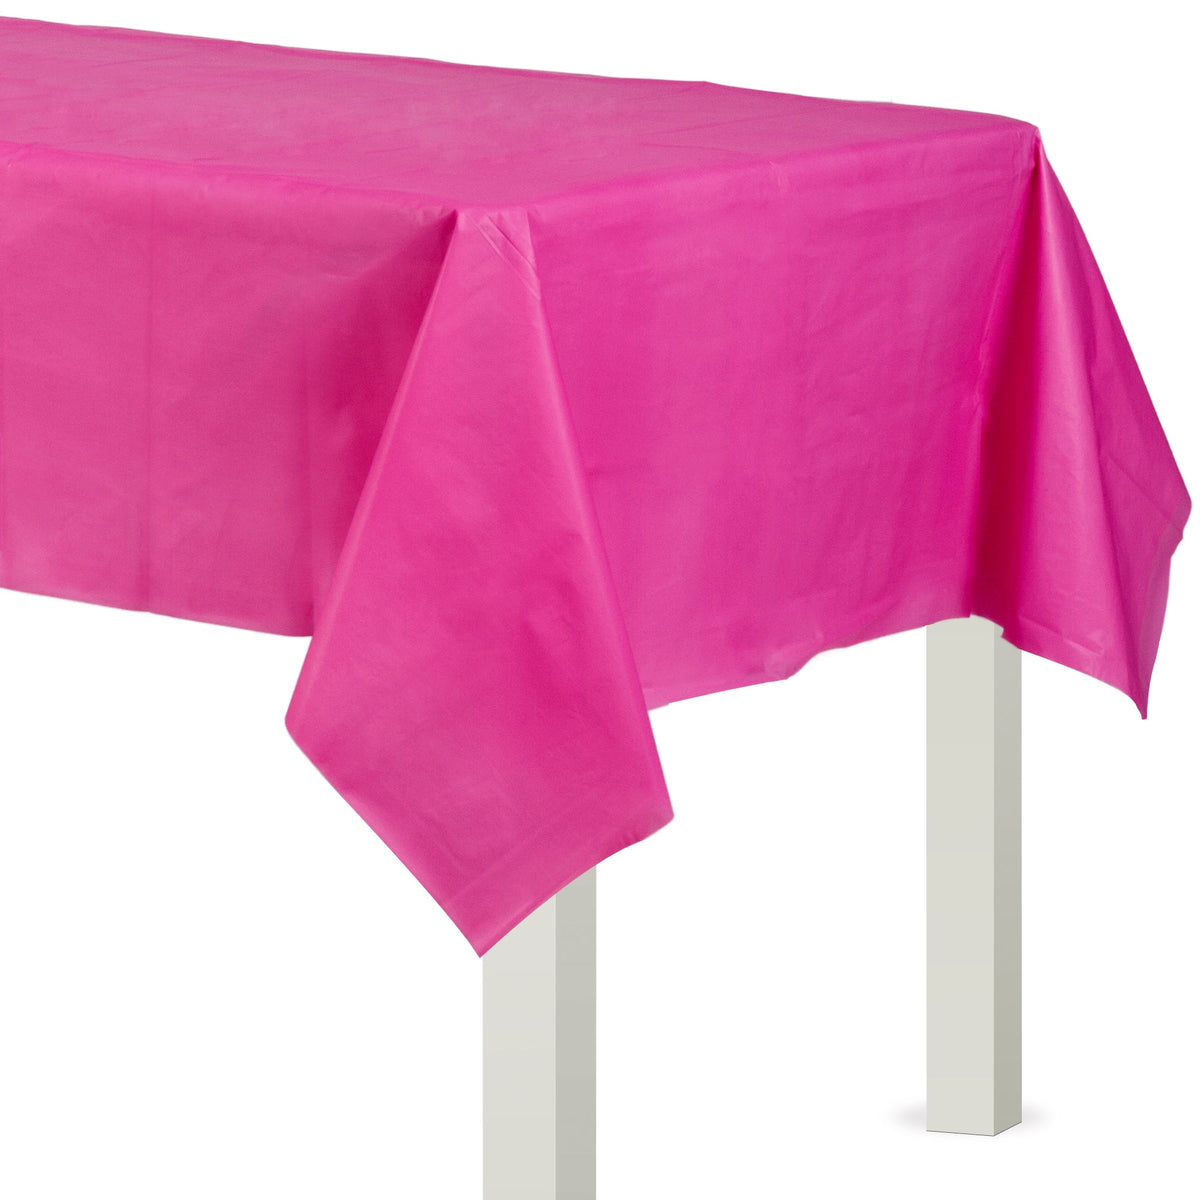 Bright Pink Flannel Backed Table Cover 54" x 108"